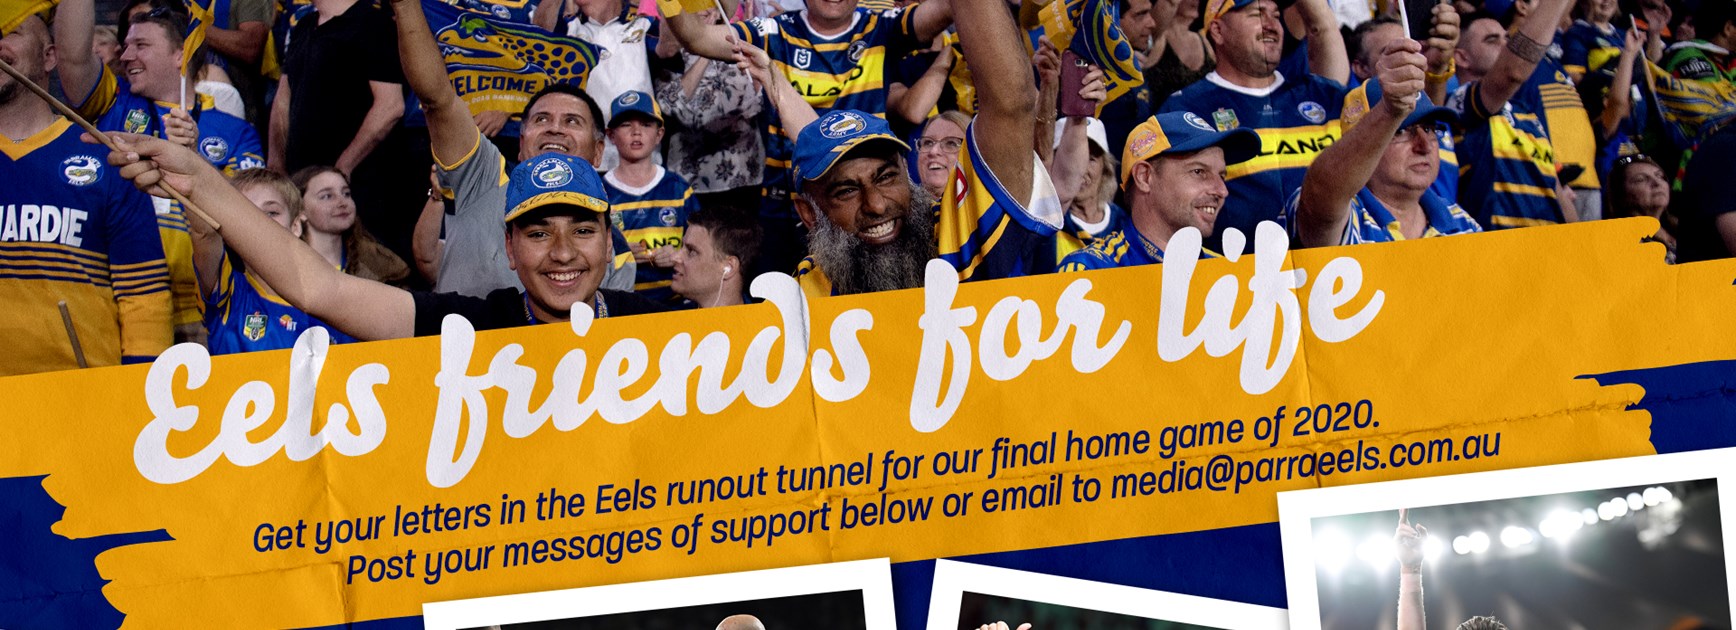 Get your letters in the Eels' runout tunnel